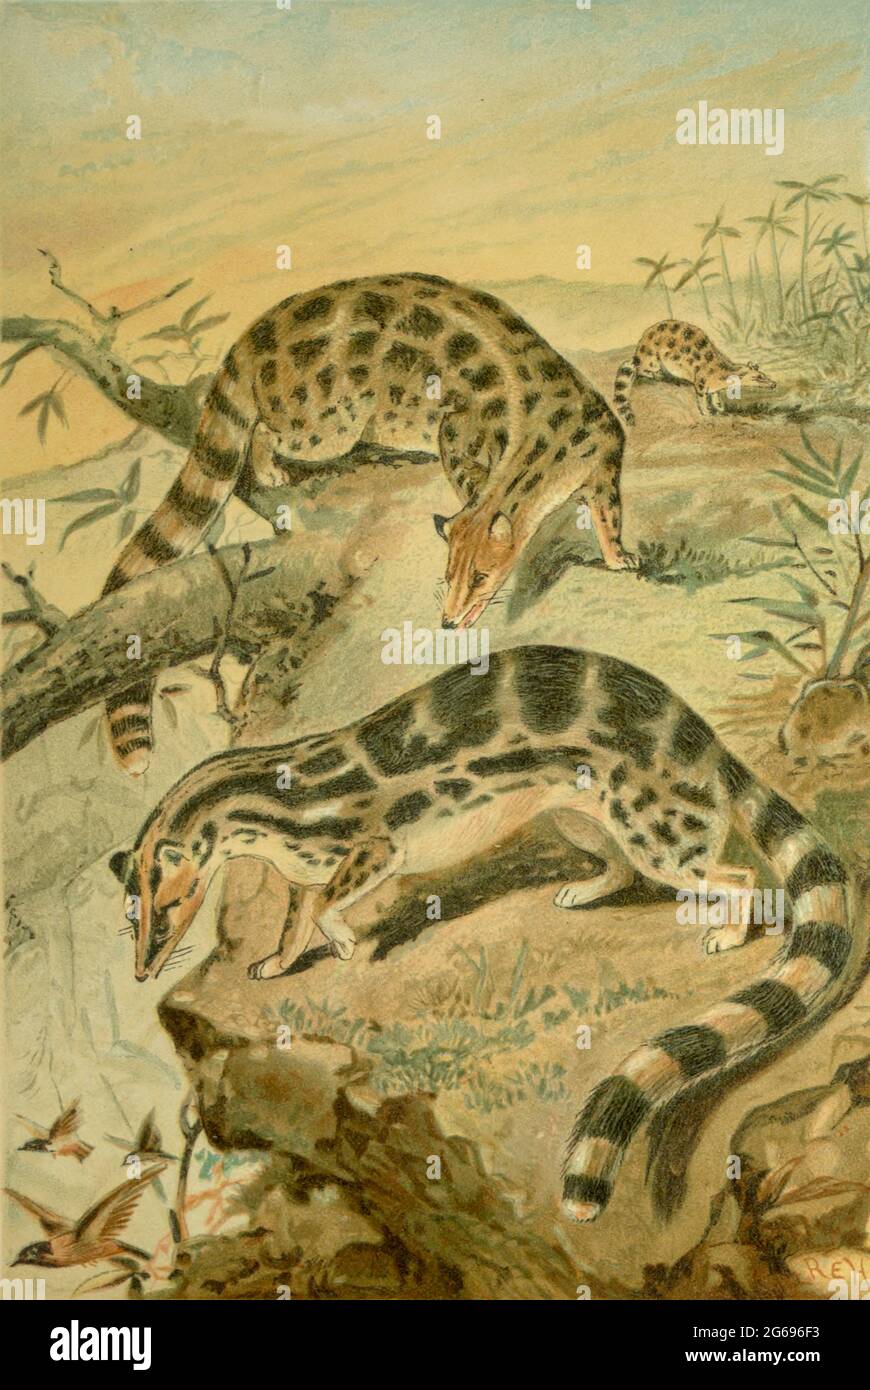 The linsangs are four species of tree-dwelling carnivorous mammals From the book ' Royal Natural History ' Volume 1 Edited by  Richard Lydekker, Published in London by Frederick Warne & Co in 1893-1894 Stock Photo